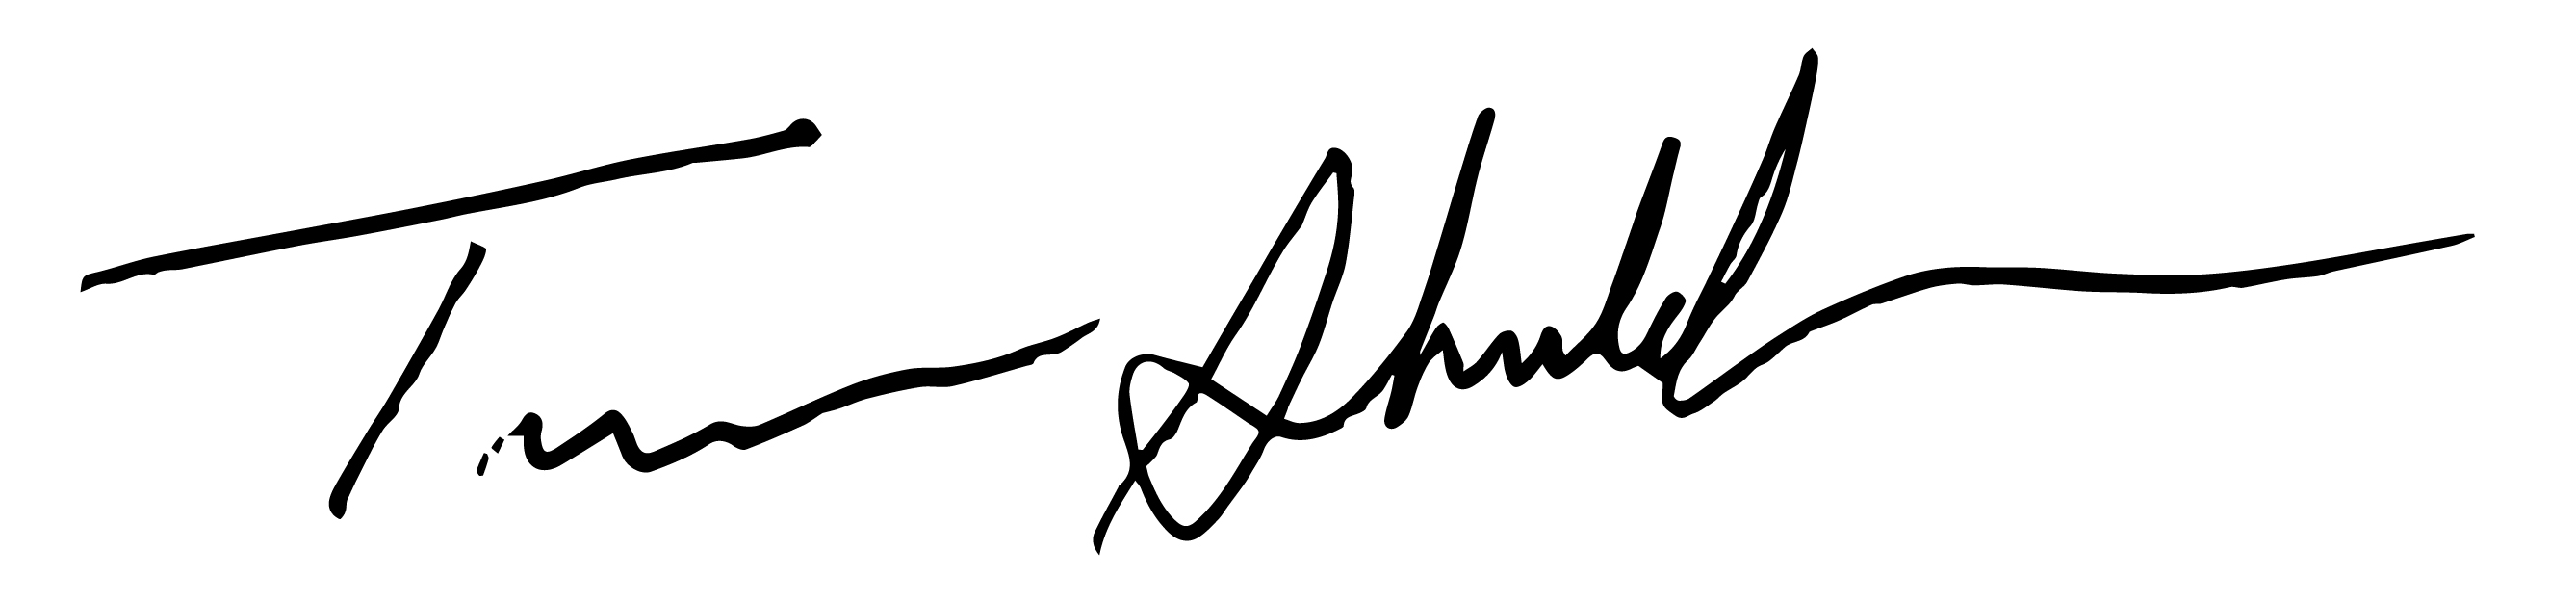 Electronic Signature Shields_Terence_hr.jpg